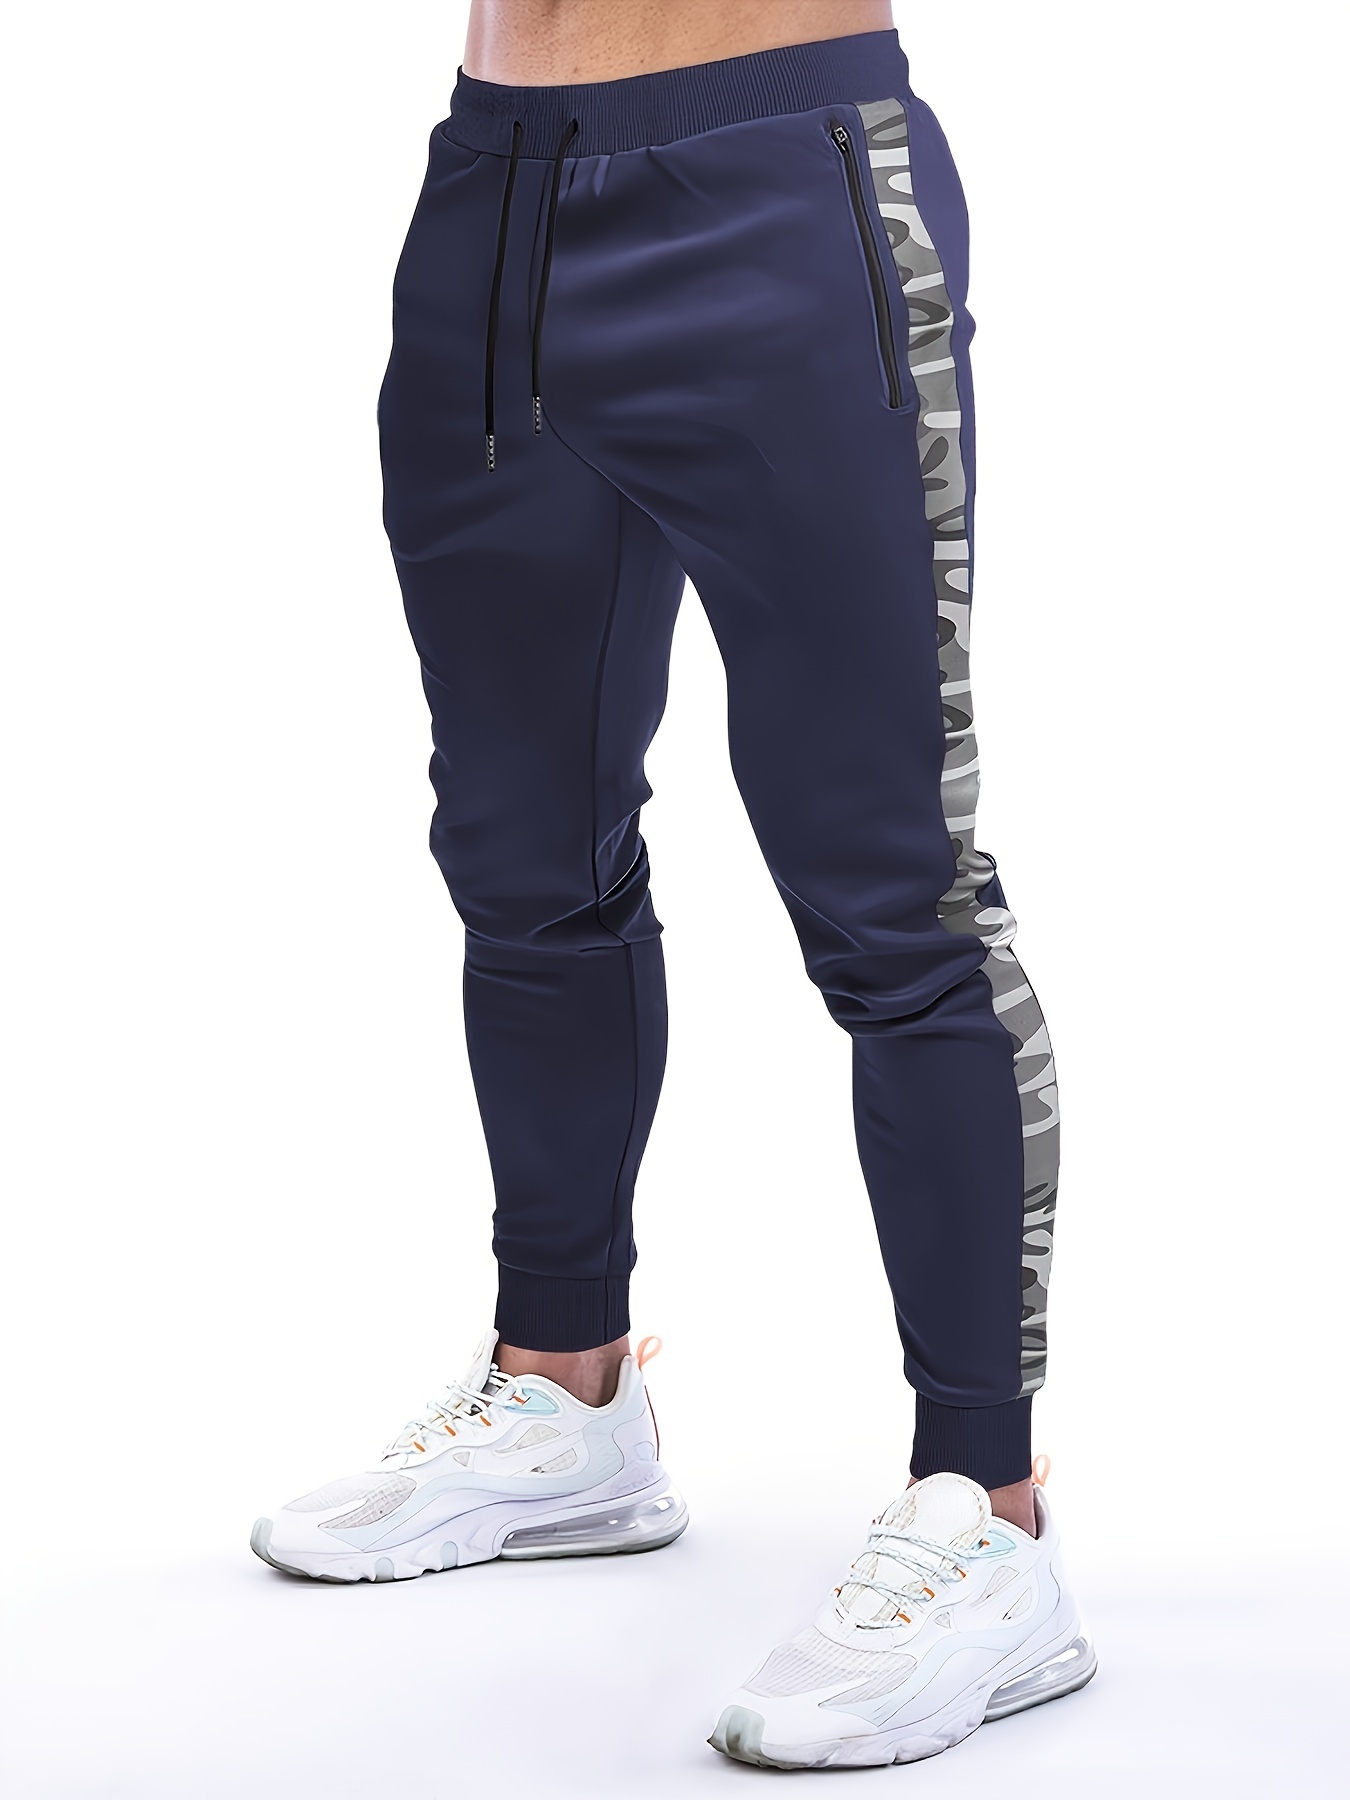 High Fashion Mens Drawstring Jogger Pants In Cotton Sports Sports Trousers  For Men For Gym And Jogging From Conniejersey, $23.86